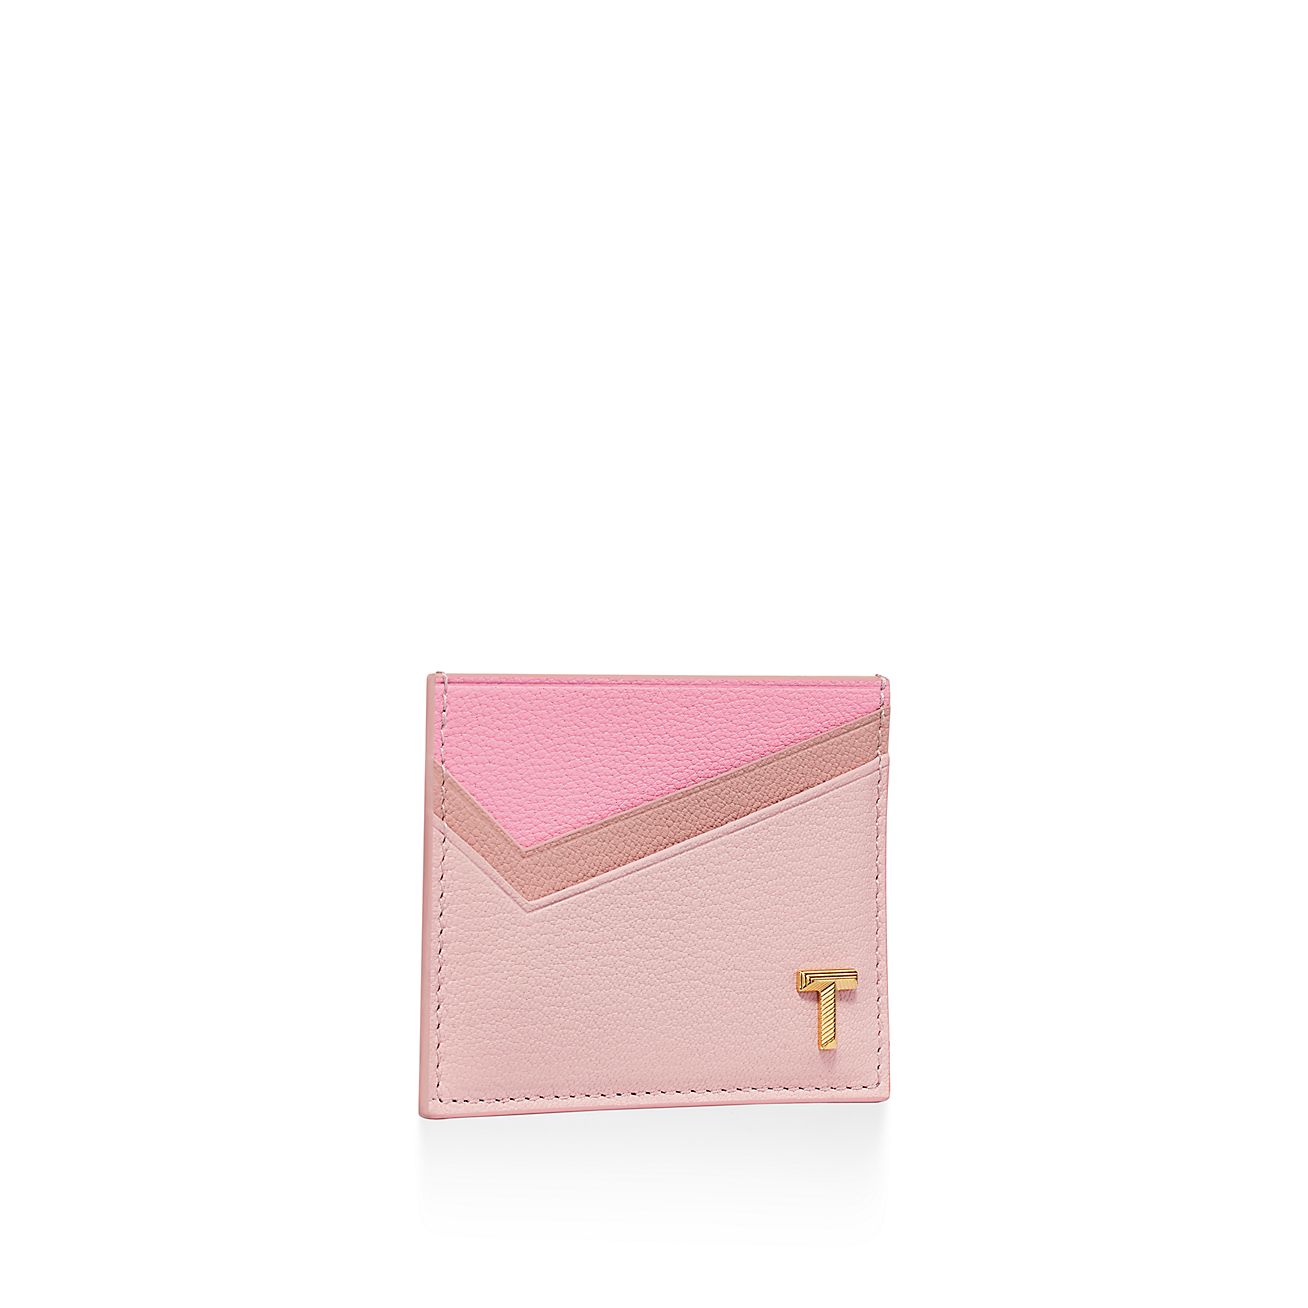 Tiffany T Card Case in Pink Colorblock Leather | Tiffany & Co.